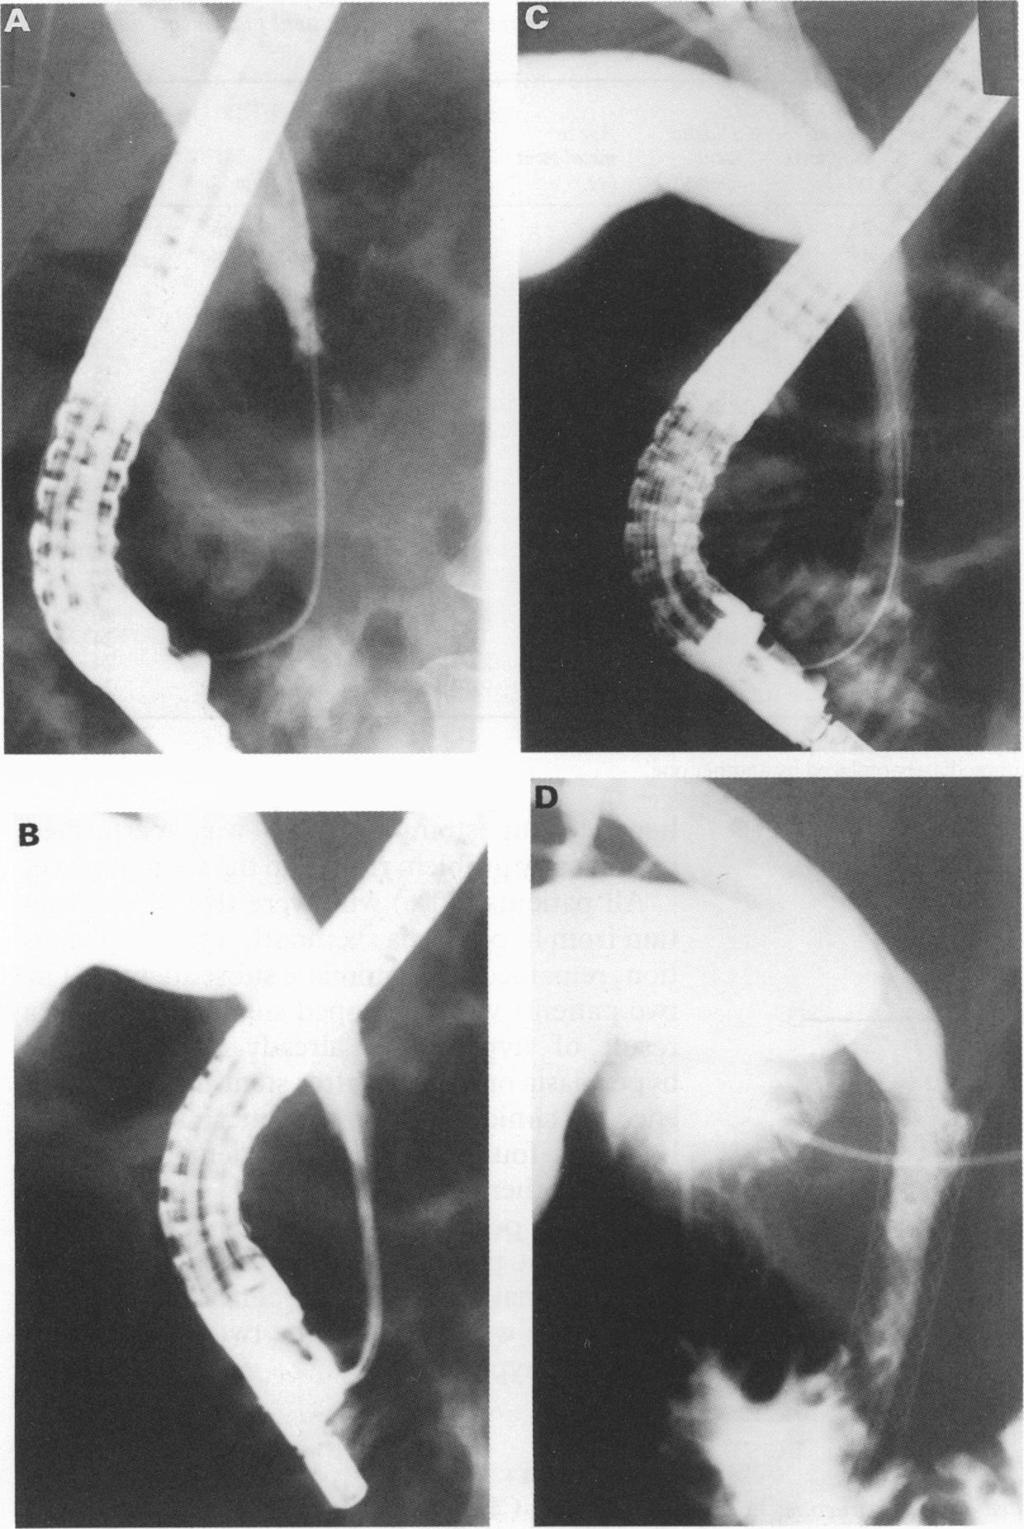 stent is endoscopically and fluoroscopically adjusted; (C) control cholangiography after stent expansion; (D) control endoscopic retrograde cholangiopancreatography 24 months later showing that the